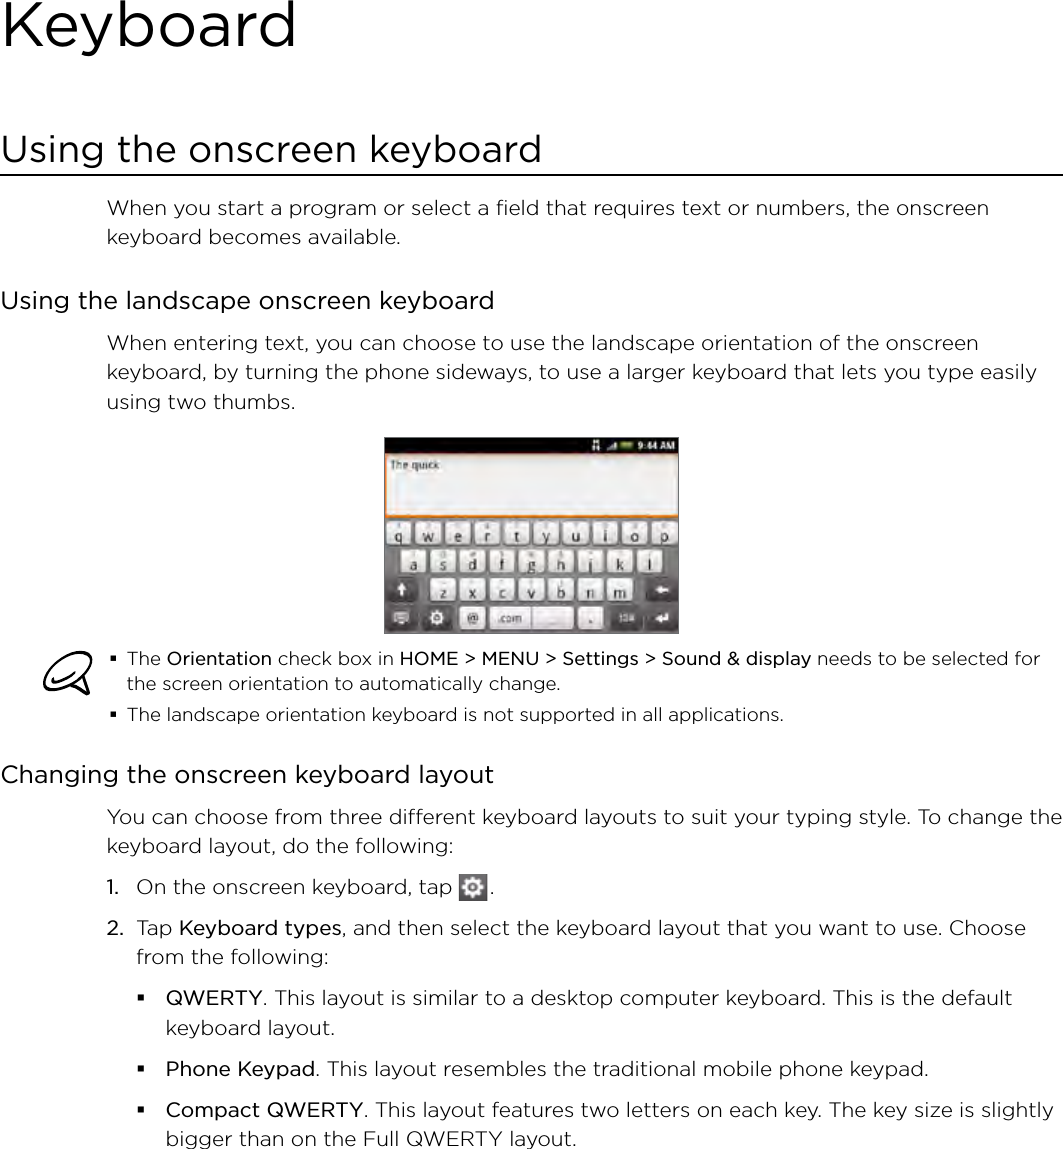 KeyboardUsing the onscreen keyboardWhen you start a program or select a field that requires text or numbers, the onscreen keyboard becomes available.Using the landscape onscreen keyboardWhen entering text, you can choose to use the landscape orientation of the onscreen keyboard, by turning the phone sideways, to use a larger keyboard that lets you type easily using two thumbs. The Orientation check box in HOME &gt; MENU &gt; Settings &gt; Sound &amp; display needs to be selected for the screen orientation to automatically change.The landscape orientation keyboard is not supported in all applications. Changing the onscreen keyboard layoutYou can choose from three different keyboard layouts to suit your typing style. To change the keyboard layout, do the following:1.  On the onscreen keyboard, tap   .2.  Tap Keyboard types, and then select the keyboard layout that you want to use. Choose from the following:QWERTY. This layout is similar to a desktop computer keyboard. This is the default keyboard layout.Phone Keypad. This layout resembles the traditional mobile phone keypad.Compact QWERTY. This layout features two letters on each key. The key size is slightly bigger than on the Full QWERTY layout.